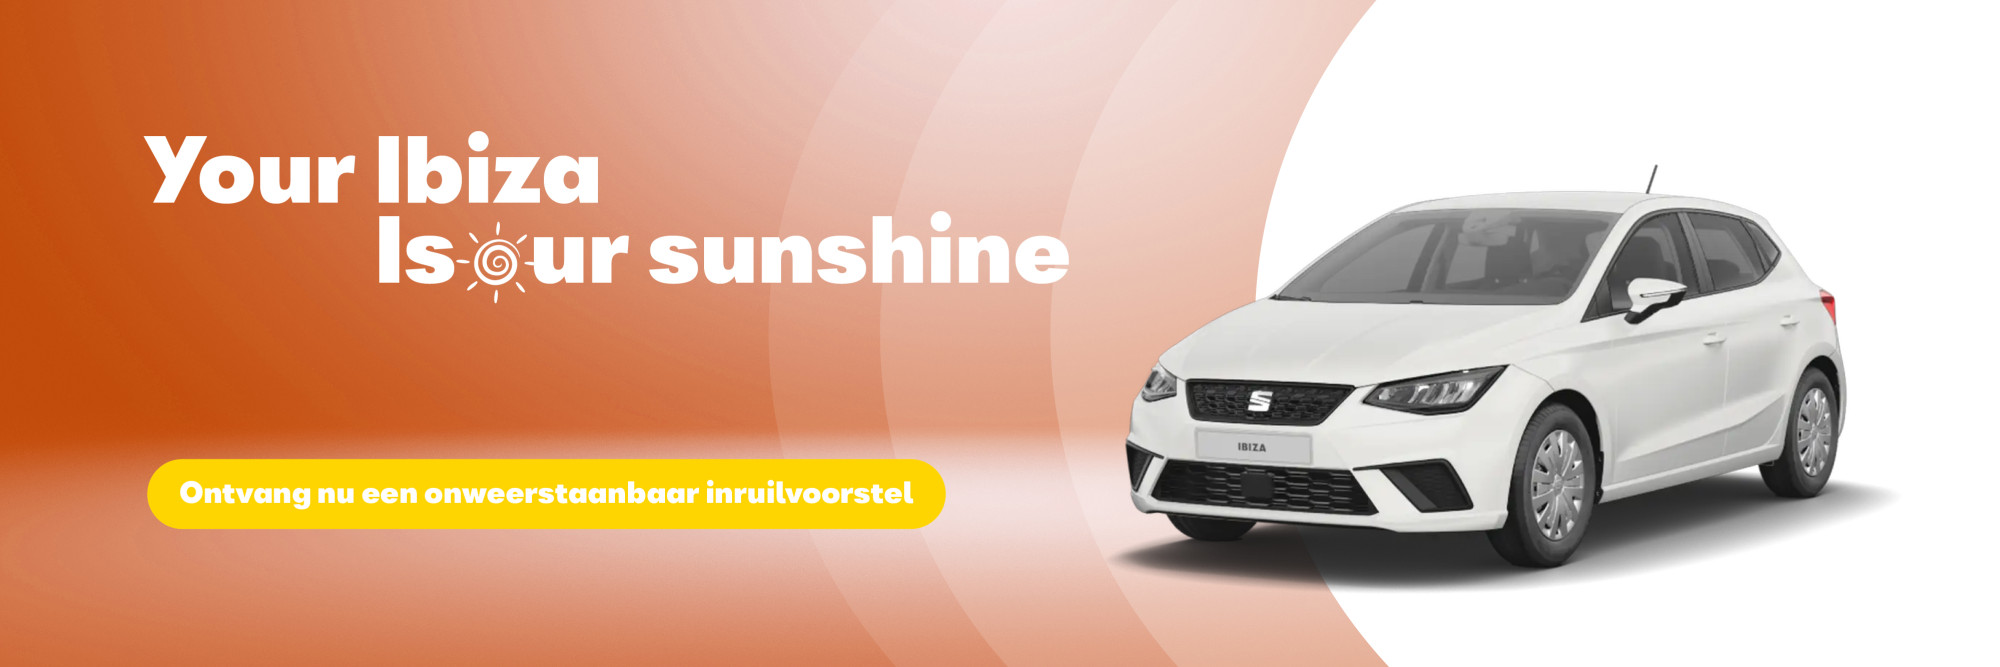 Hero Your car is our sunshineseat